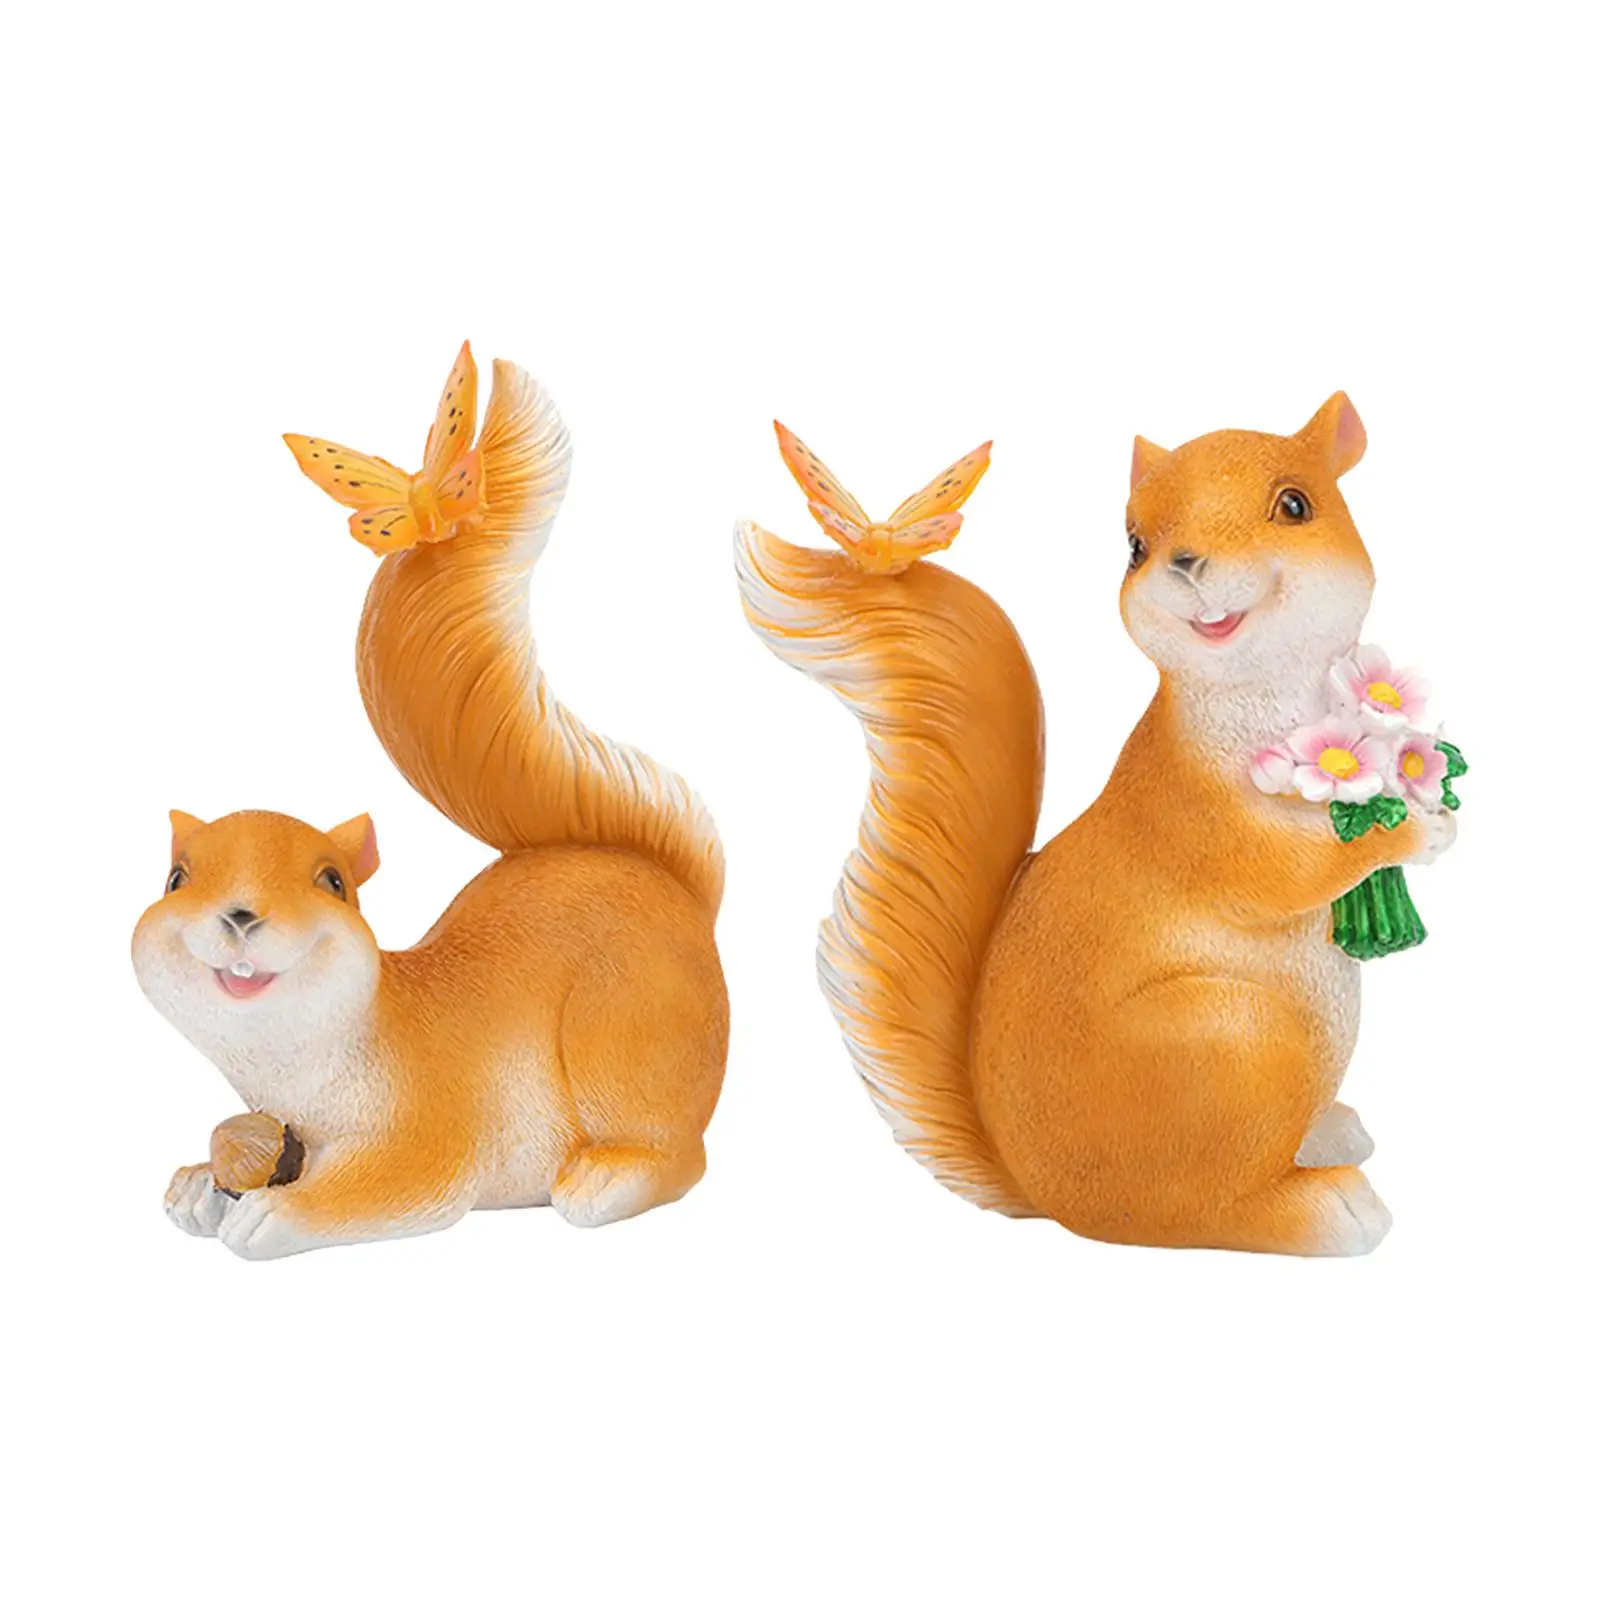 Resin Garden Squirrel Statues with Butterfly Solar Light Handpainted Animal